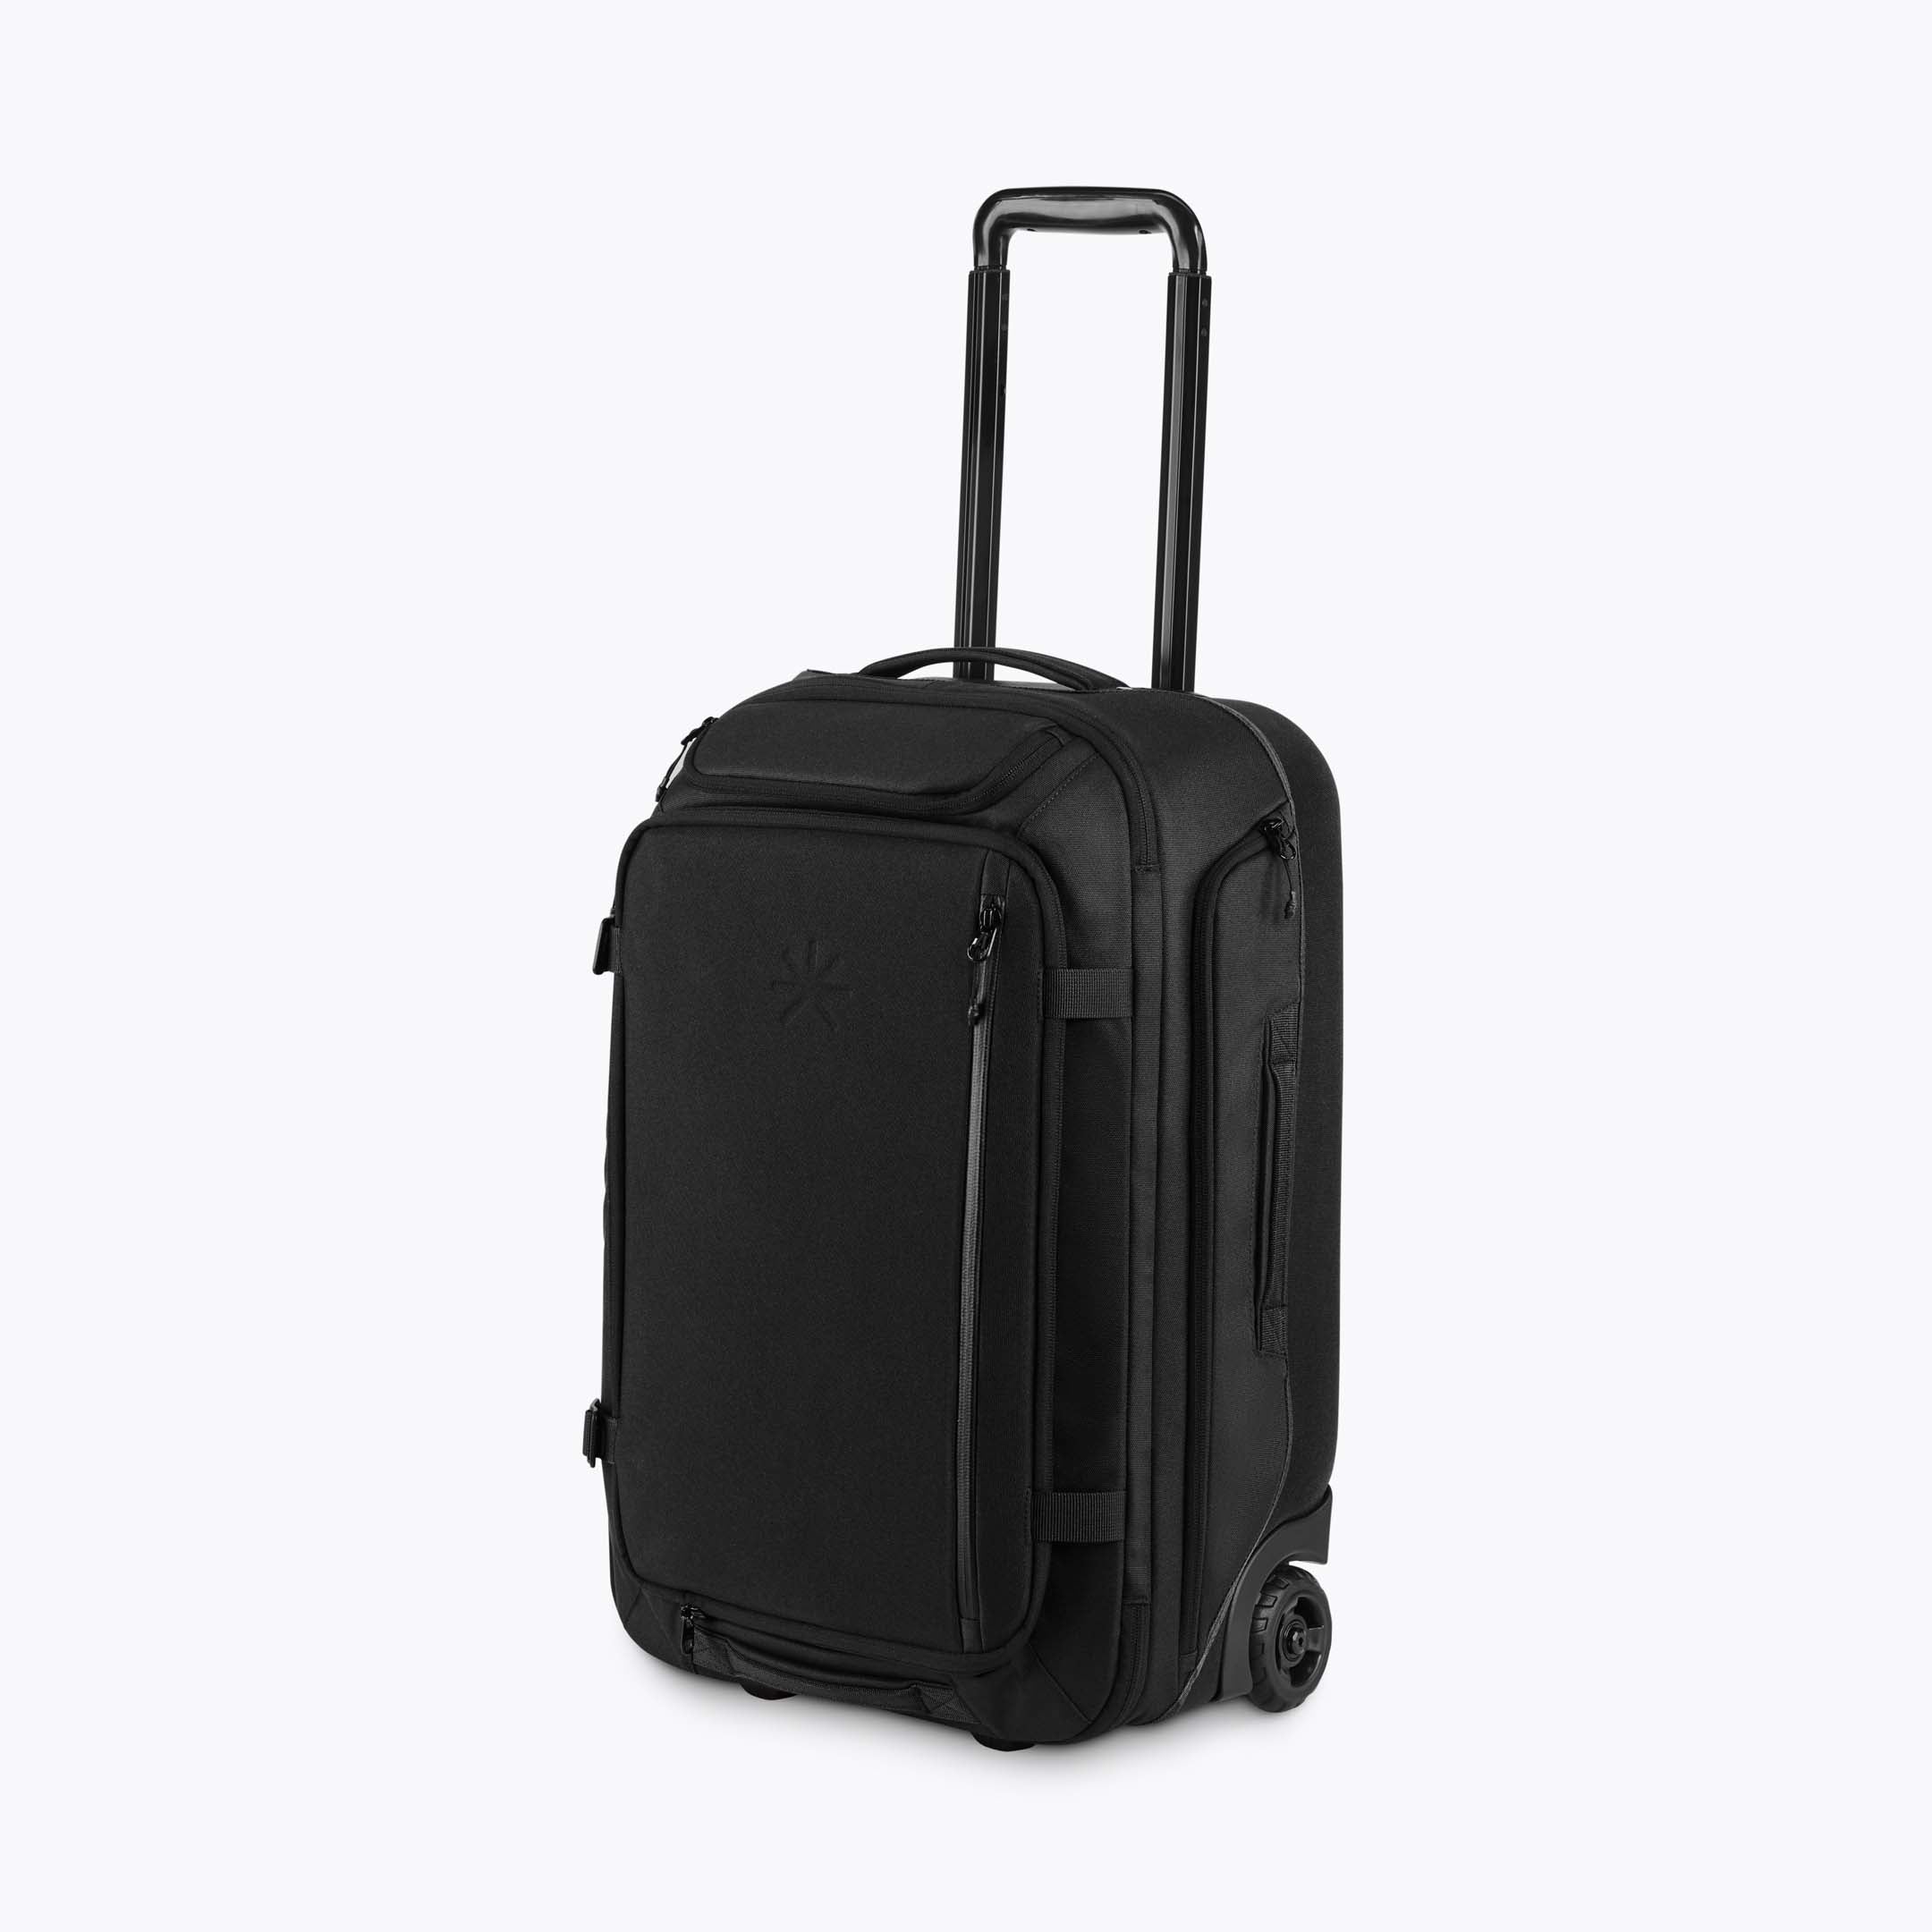 Lift 40L Rollerbag All Black + Wardrobe + Smart Packing Cube 12L Core Black + Nest Backpack All Black + Roll-Up Toiletry Bag